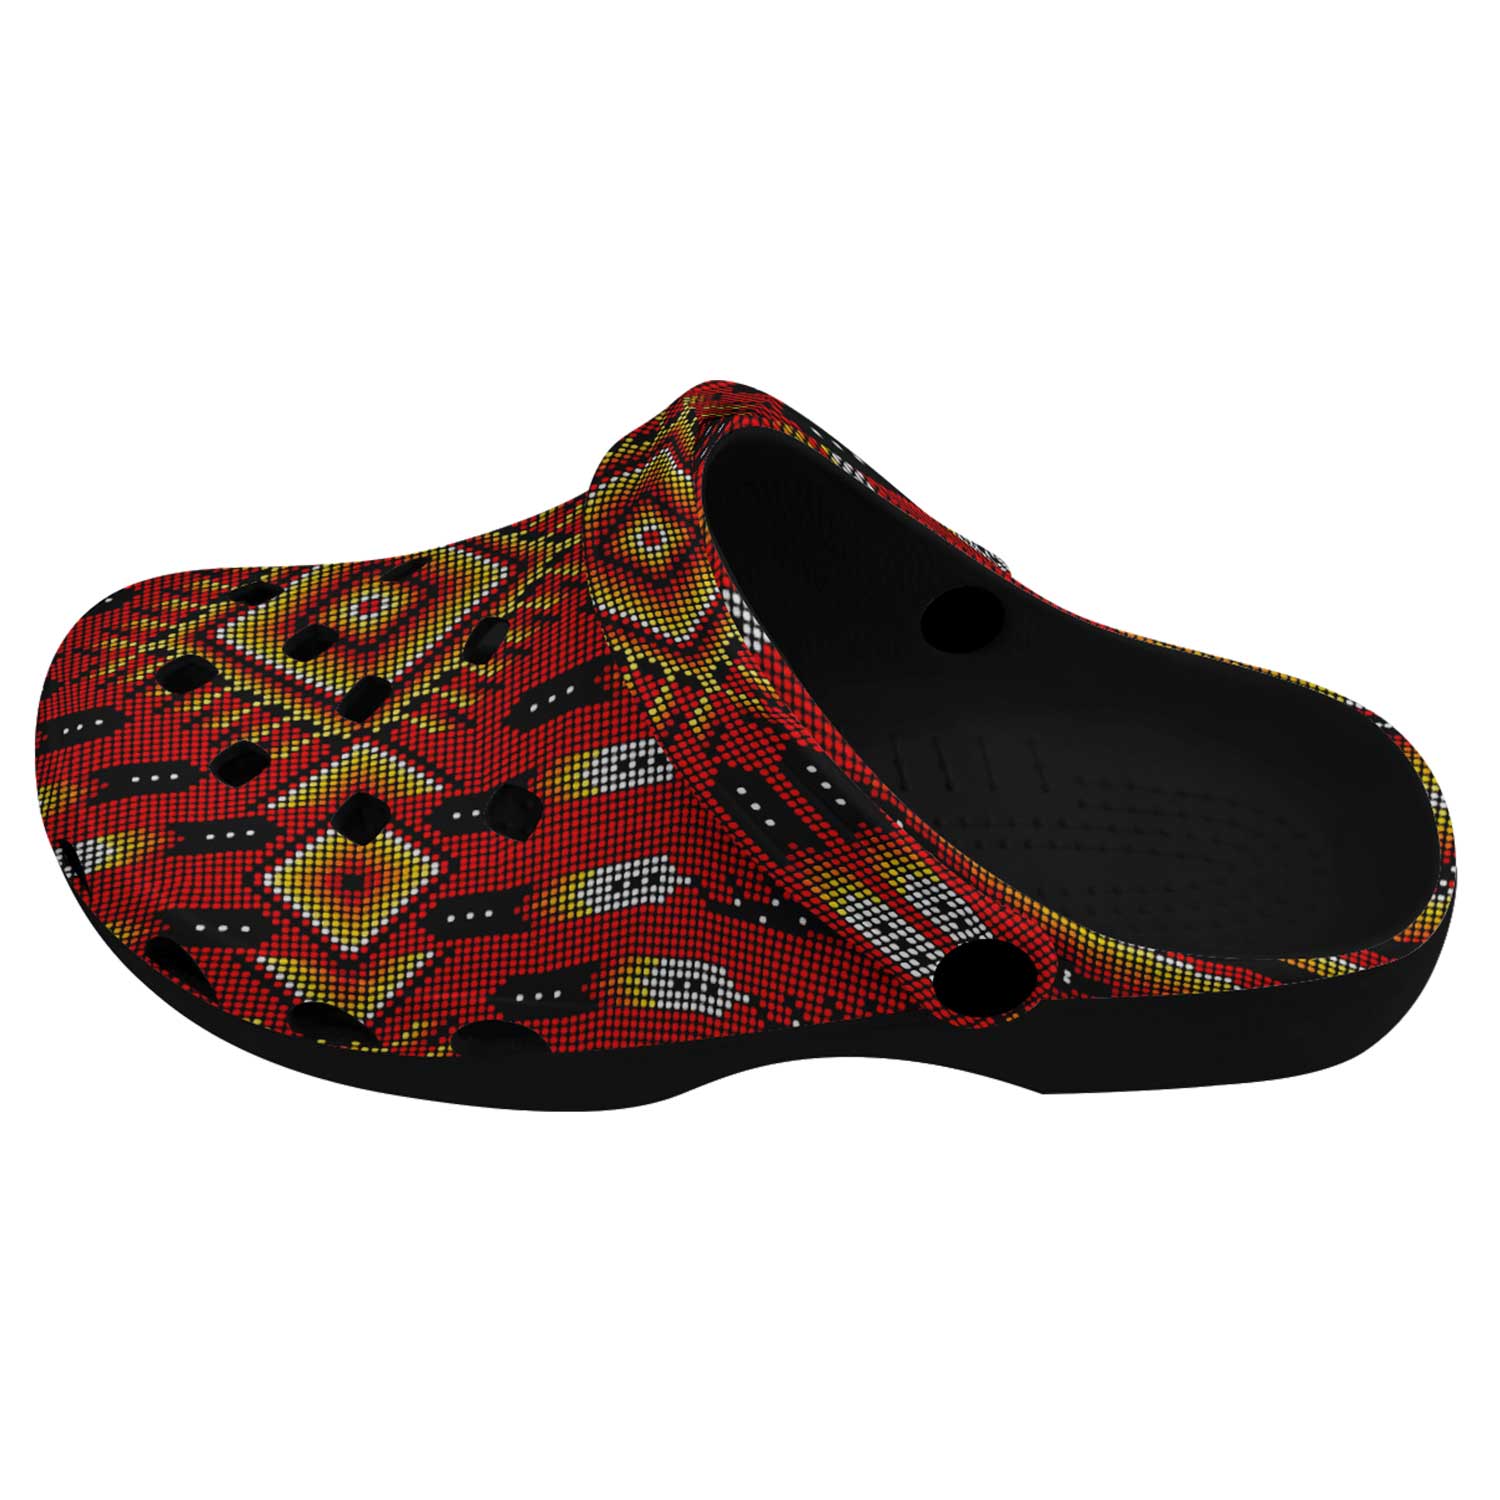 Fire Feather Red Muddies Unisex Clog Shoes